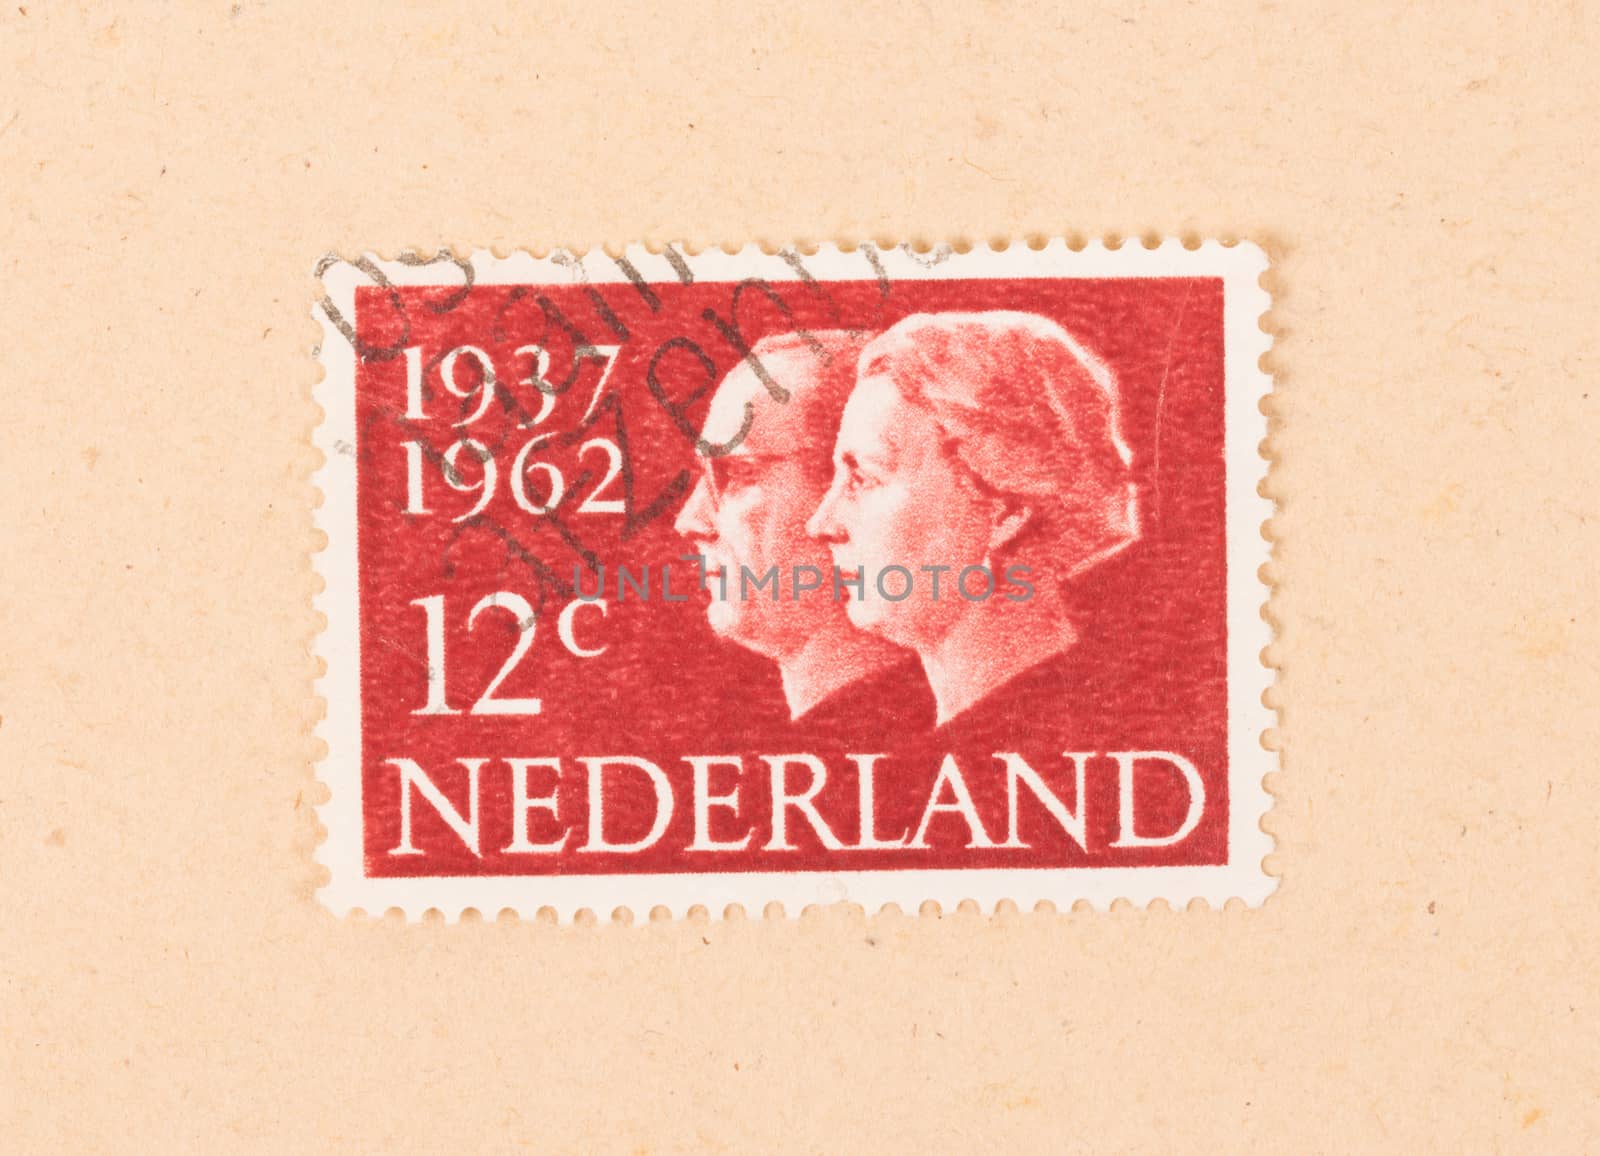 THE NETHERLANDS 1962: A stamp printed in the Netherlands shows the king and queen, circa 1962